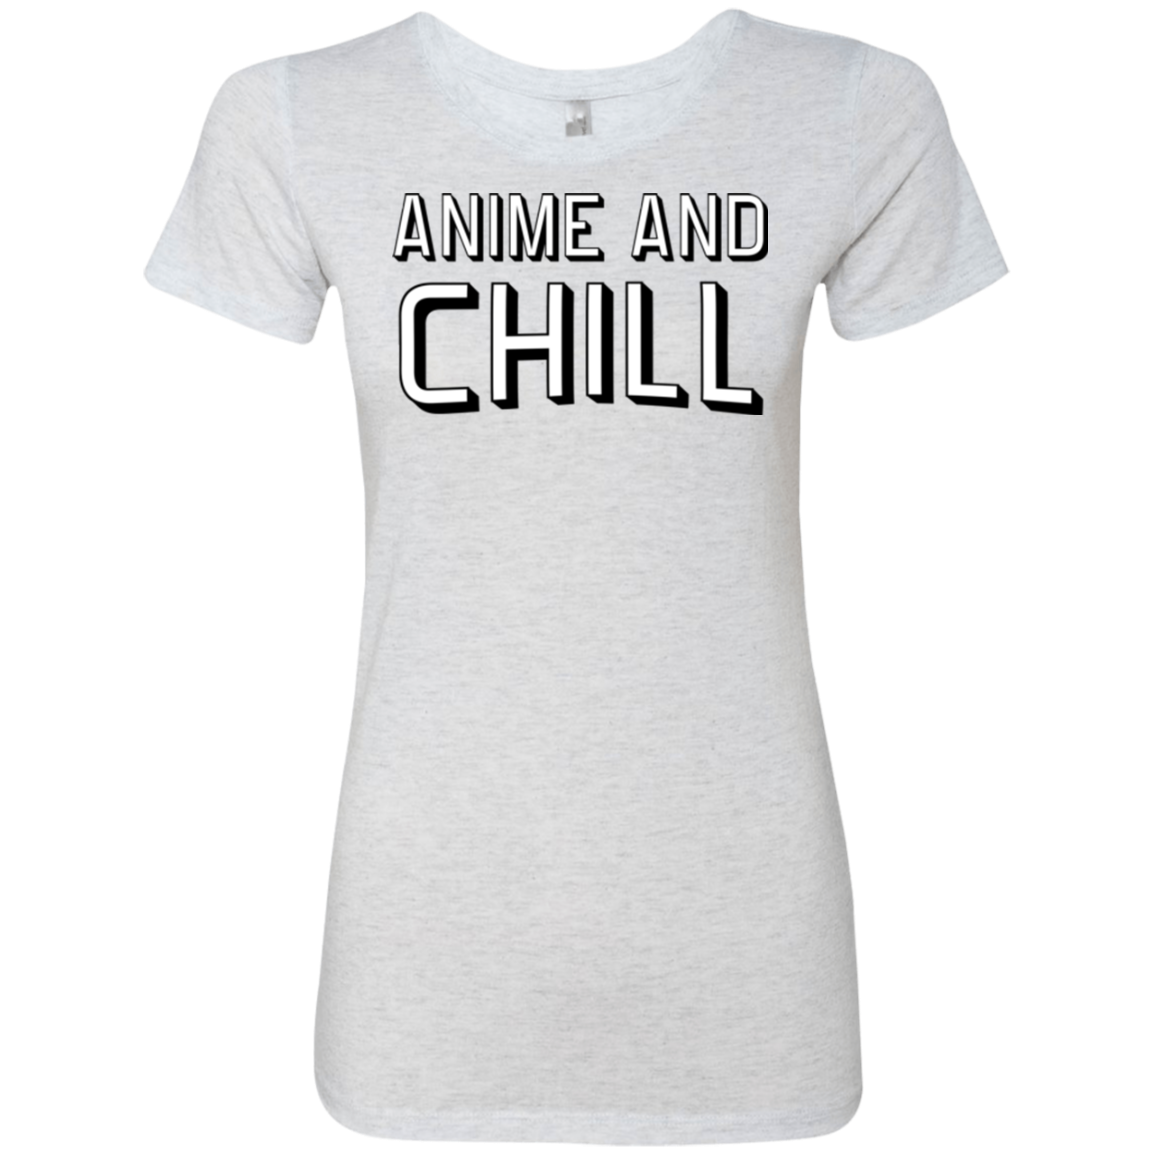 Anime and chill Women's Triblend T-Shirt